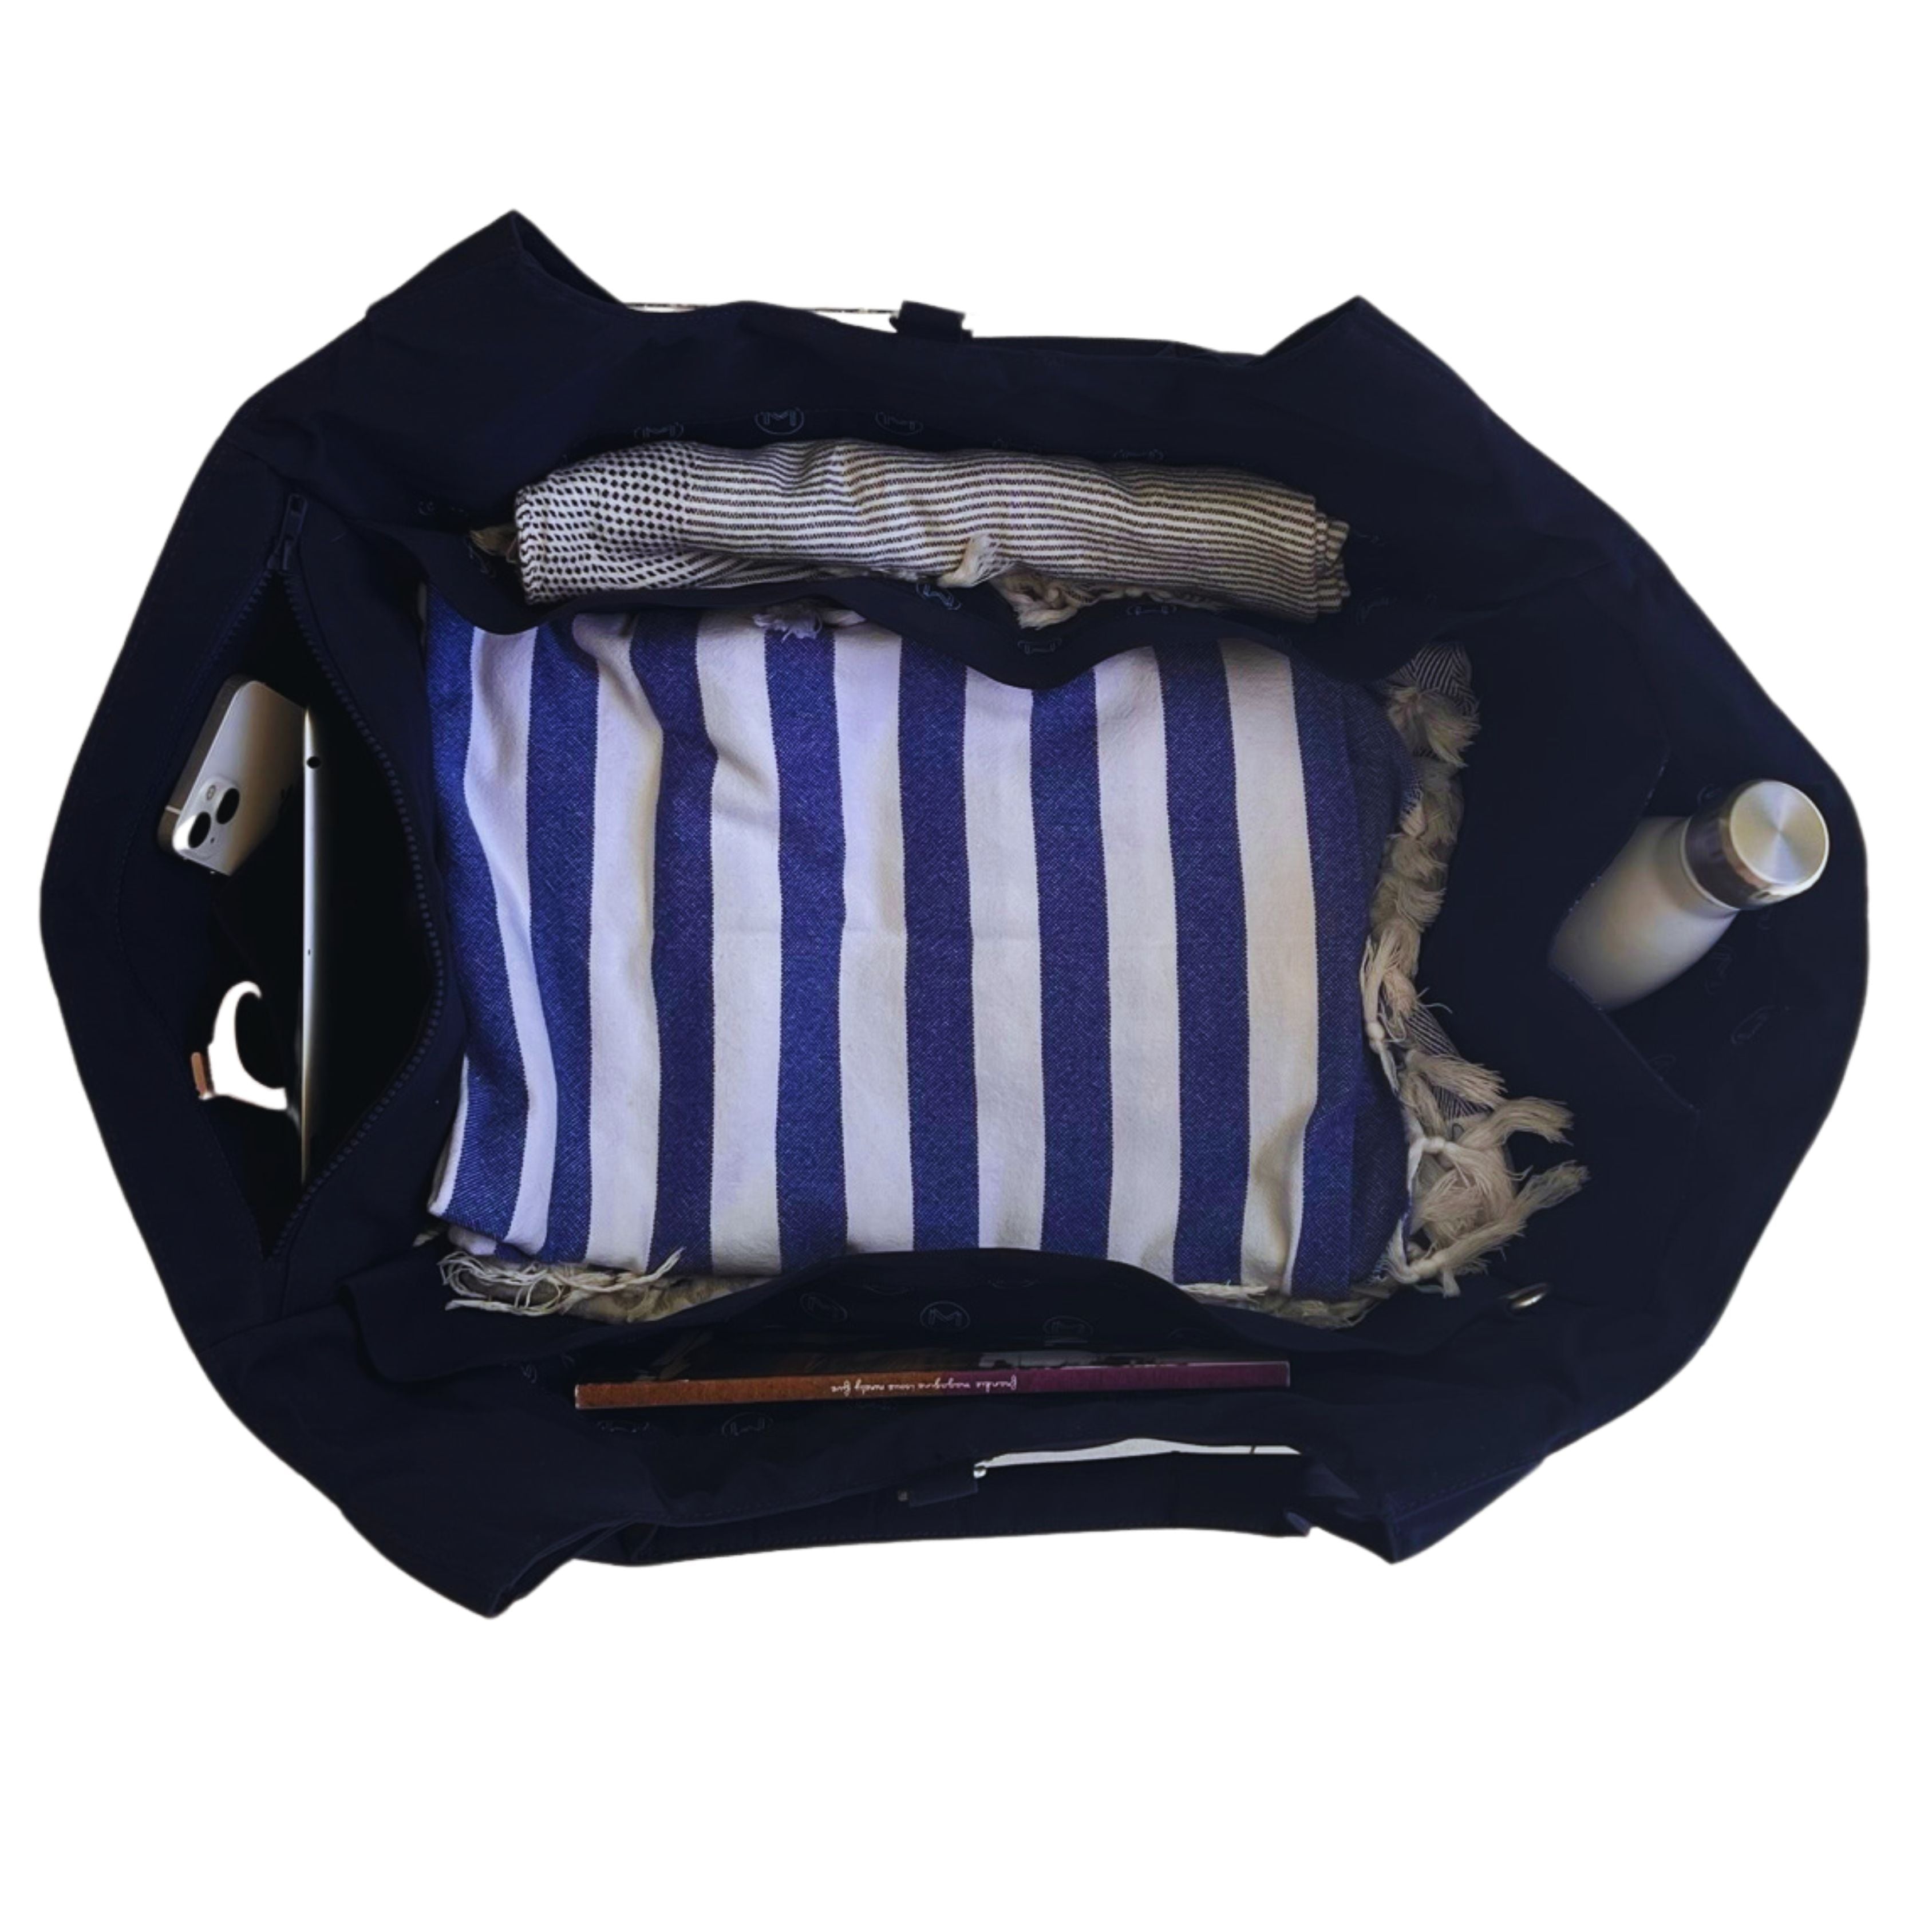 Cove Carry-all - Mirabilis Navy Blue (SOLD OUT)